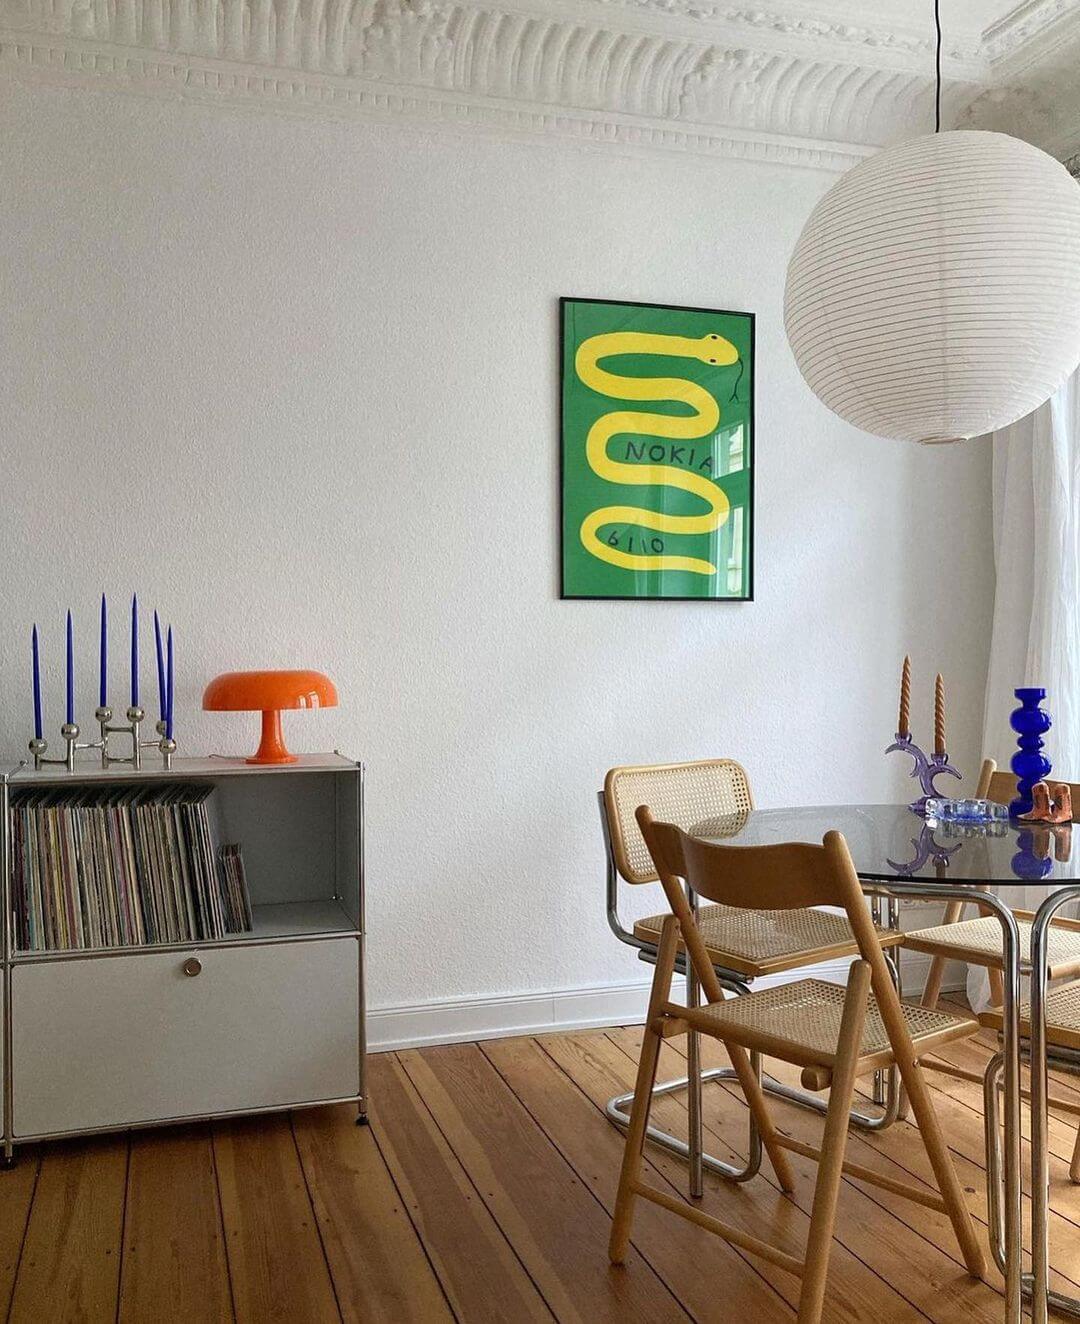 Mid Century Modern Dining Room With Green Snake Artwork Hung On The Wall